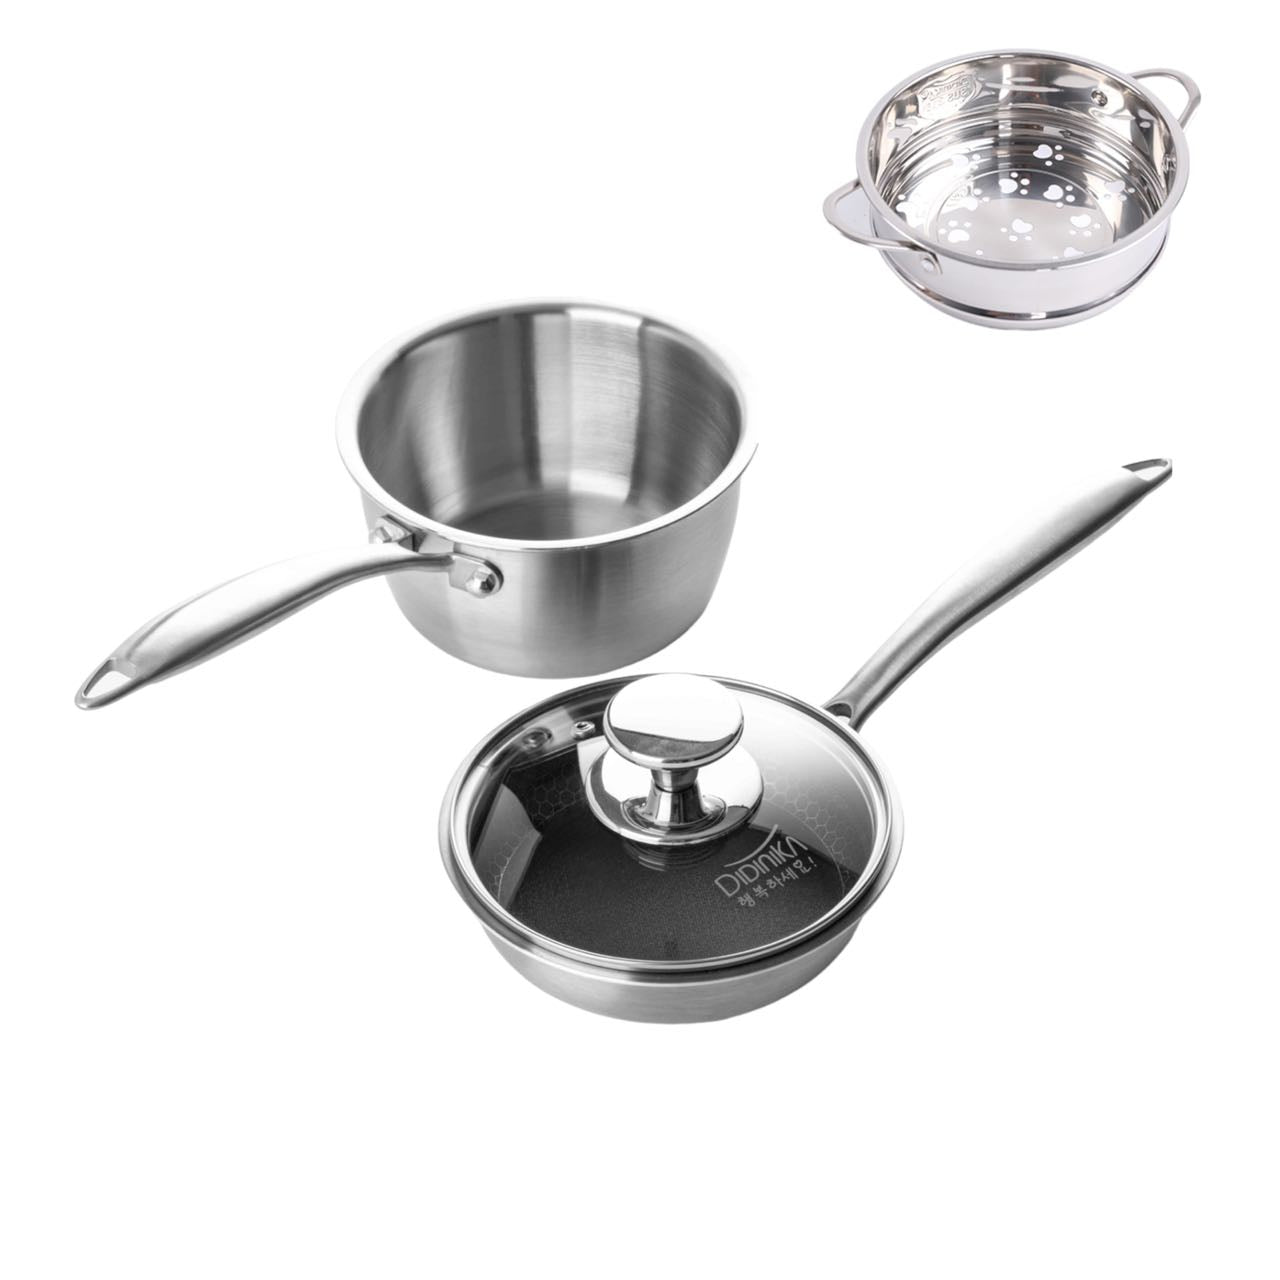 Stainless Steel Baby Cookware Set